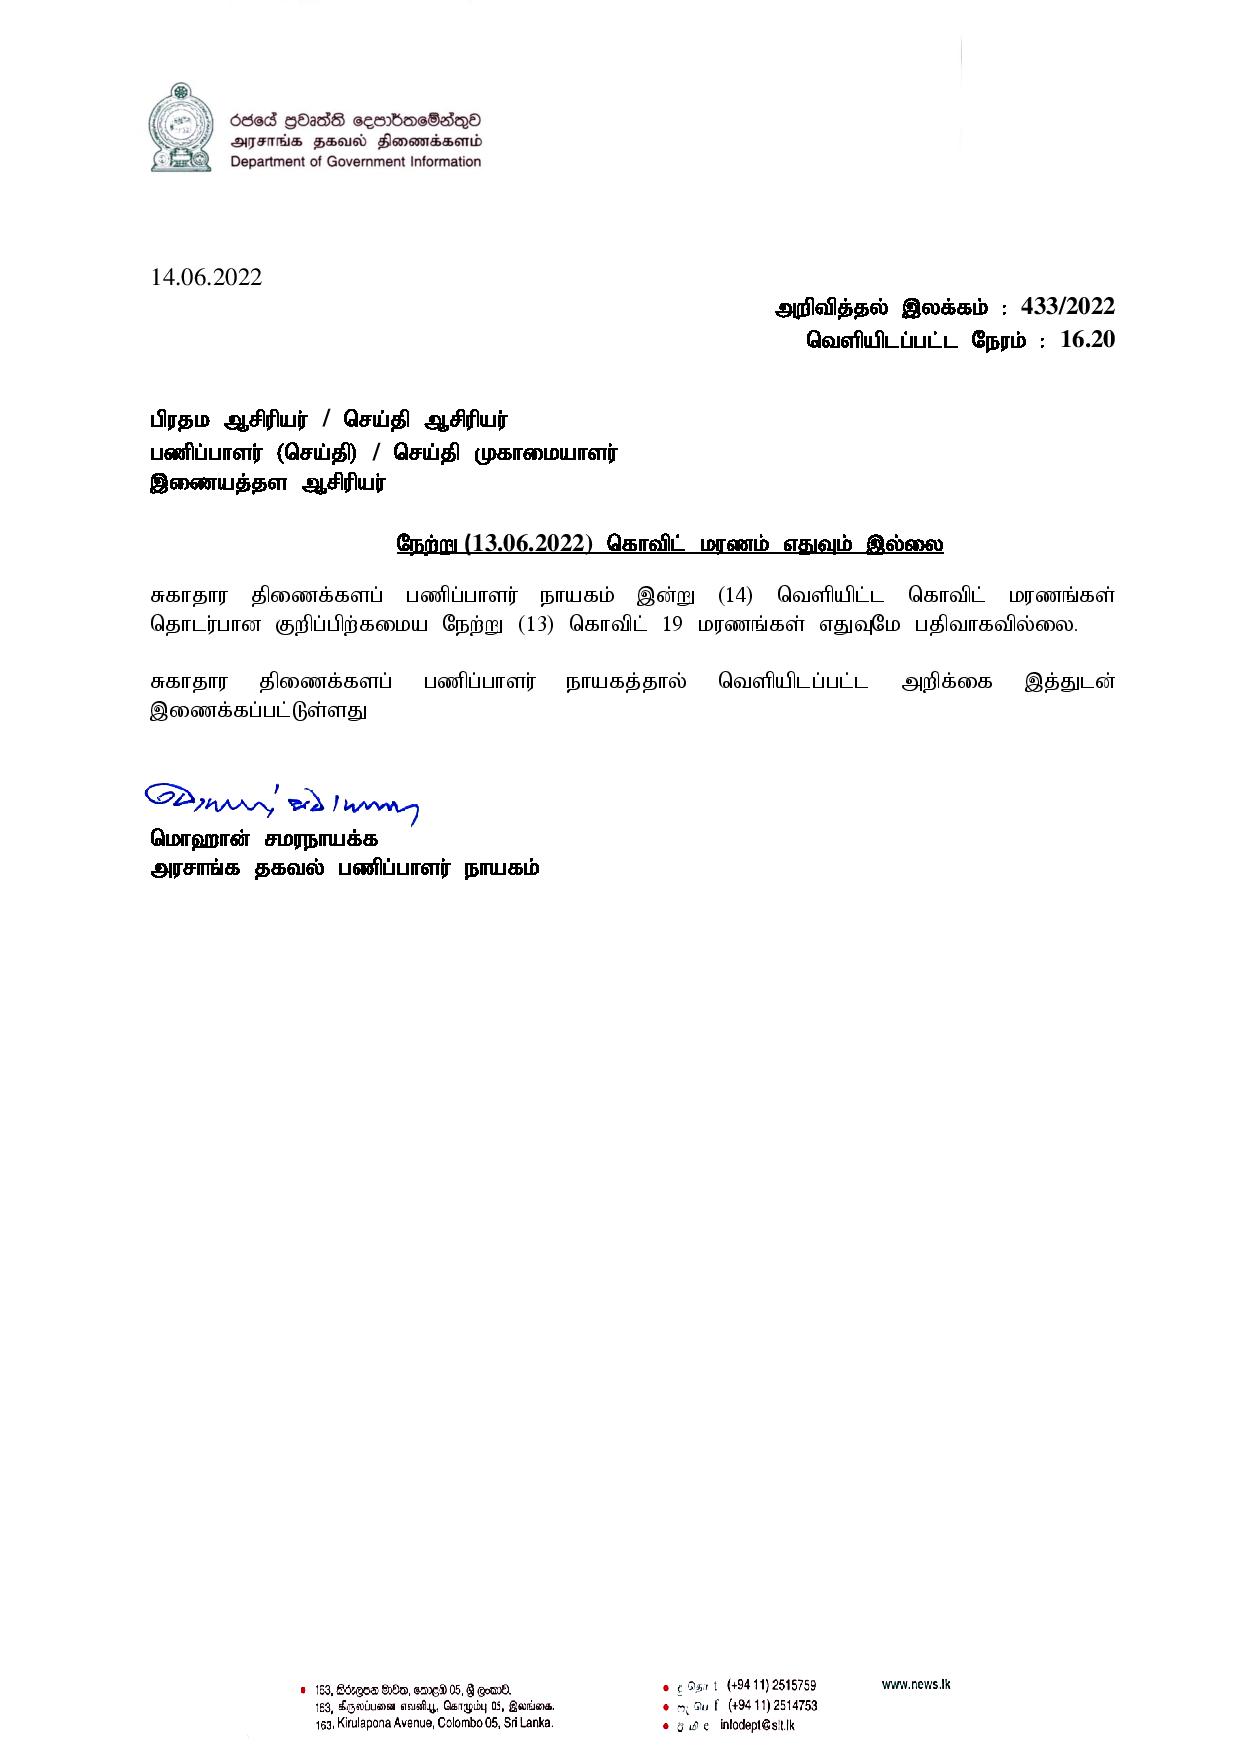 Press Release 433 Tamil page 001